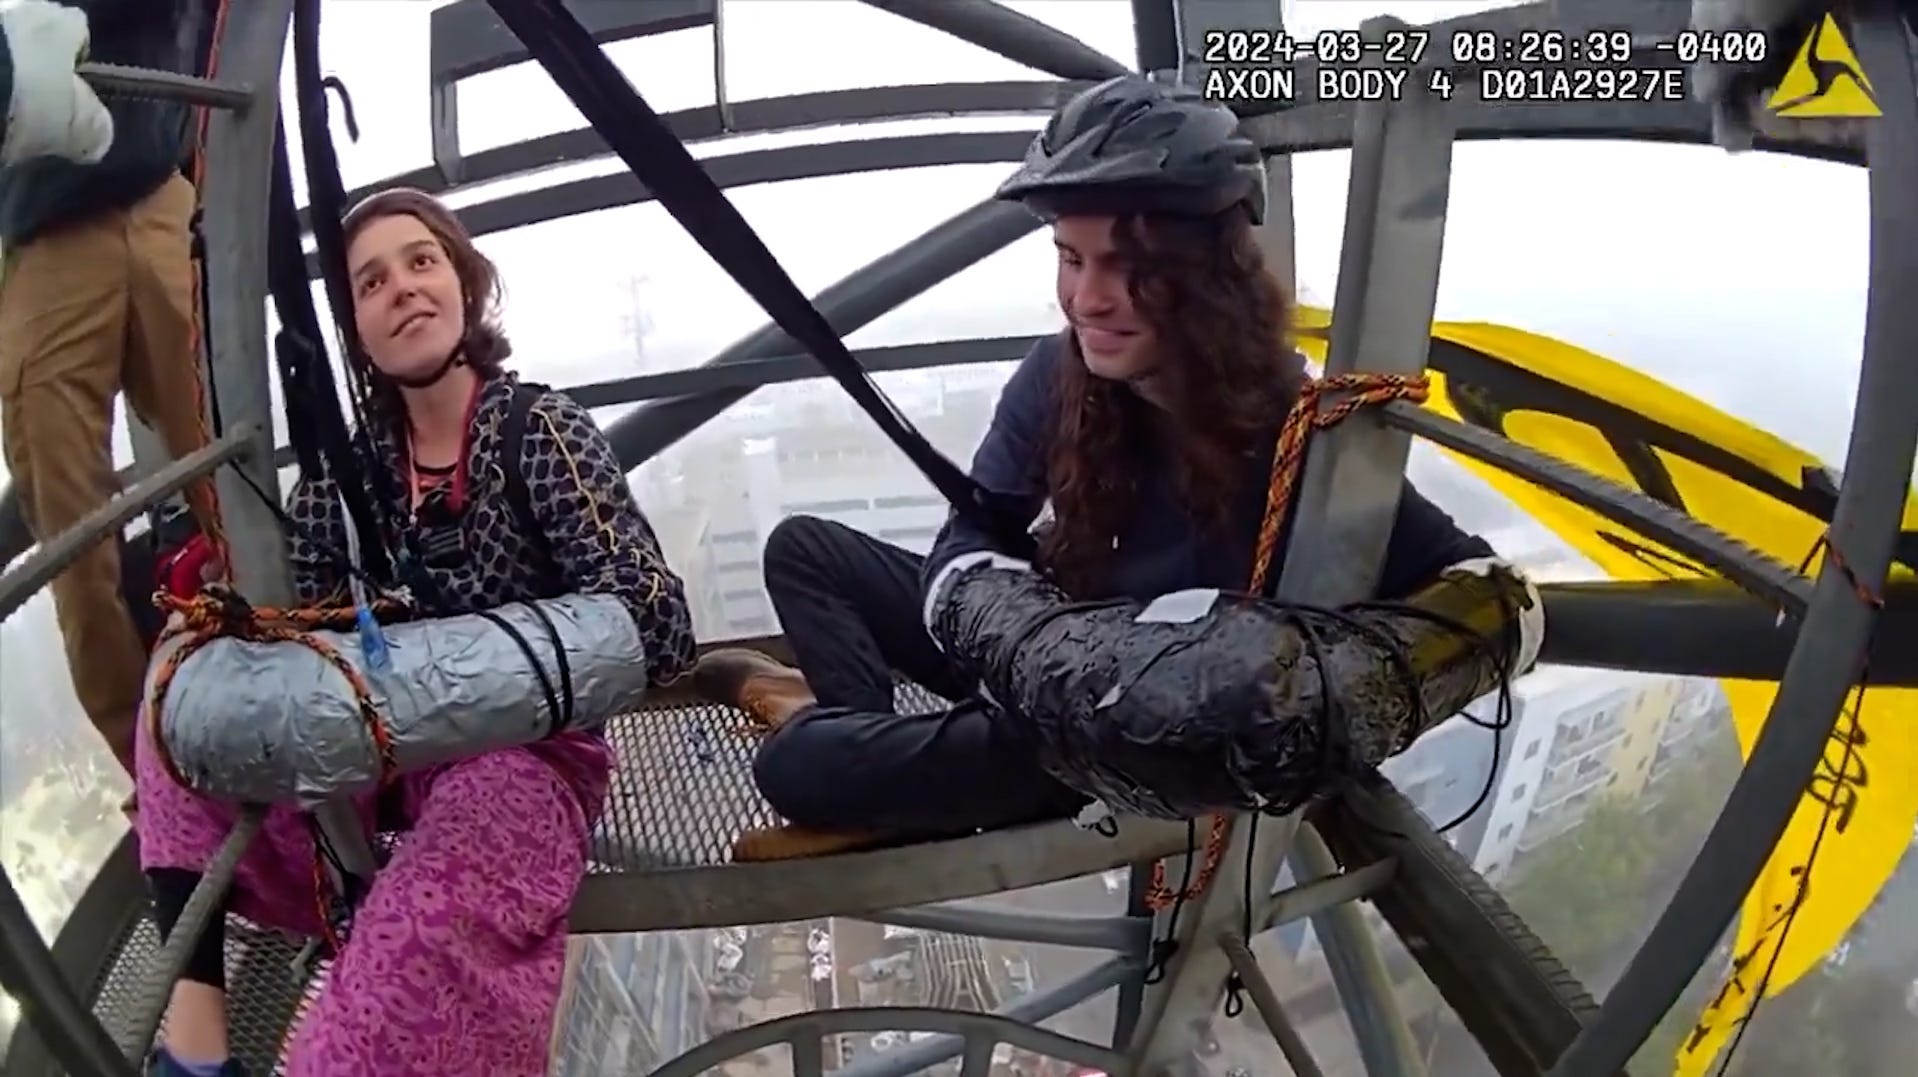 'Cop City' activists arrested after chaining themselves to top of crane